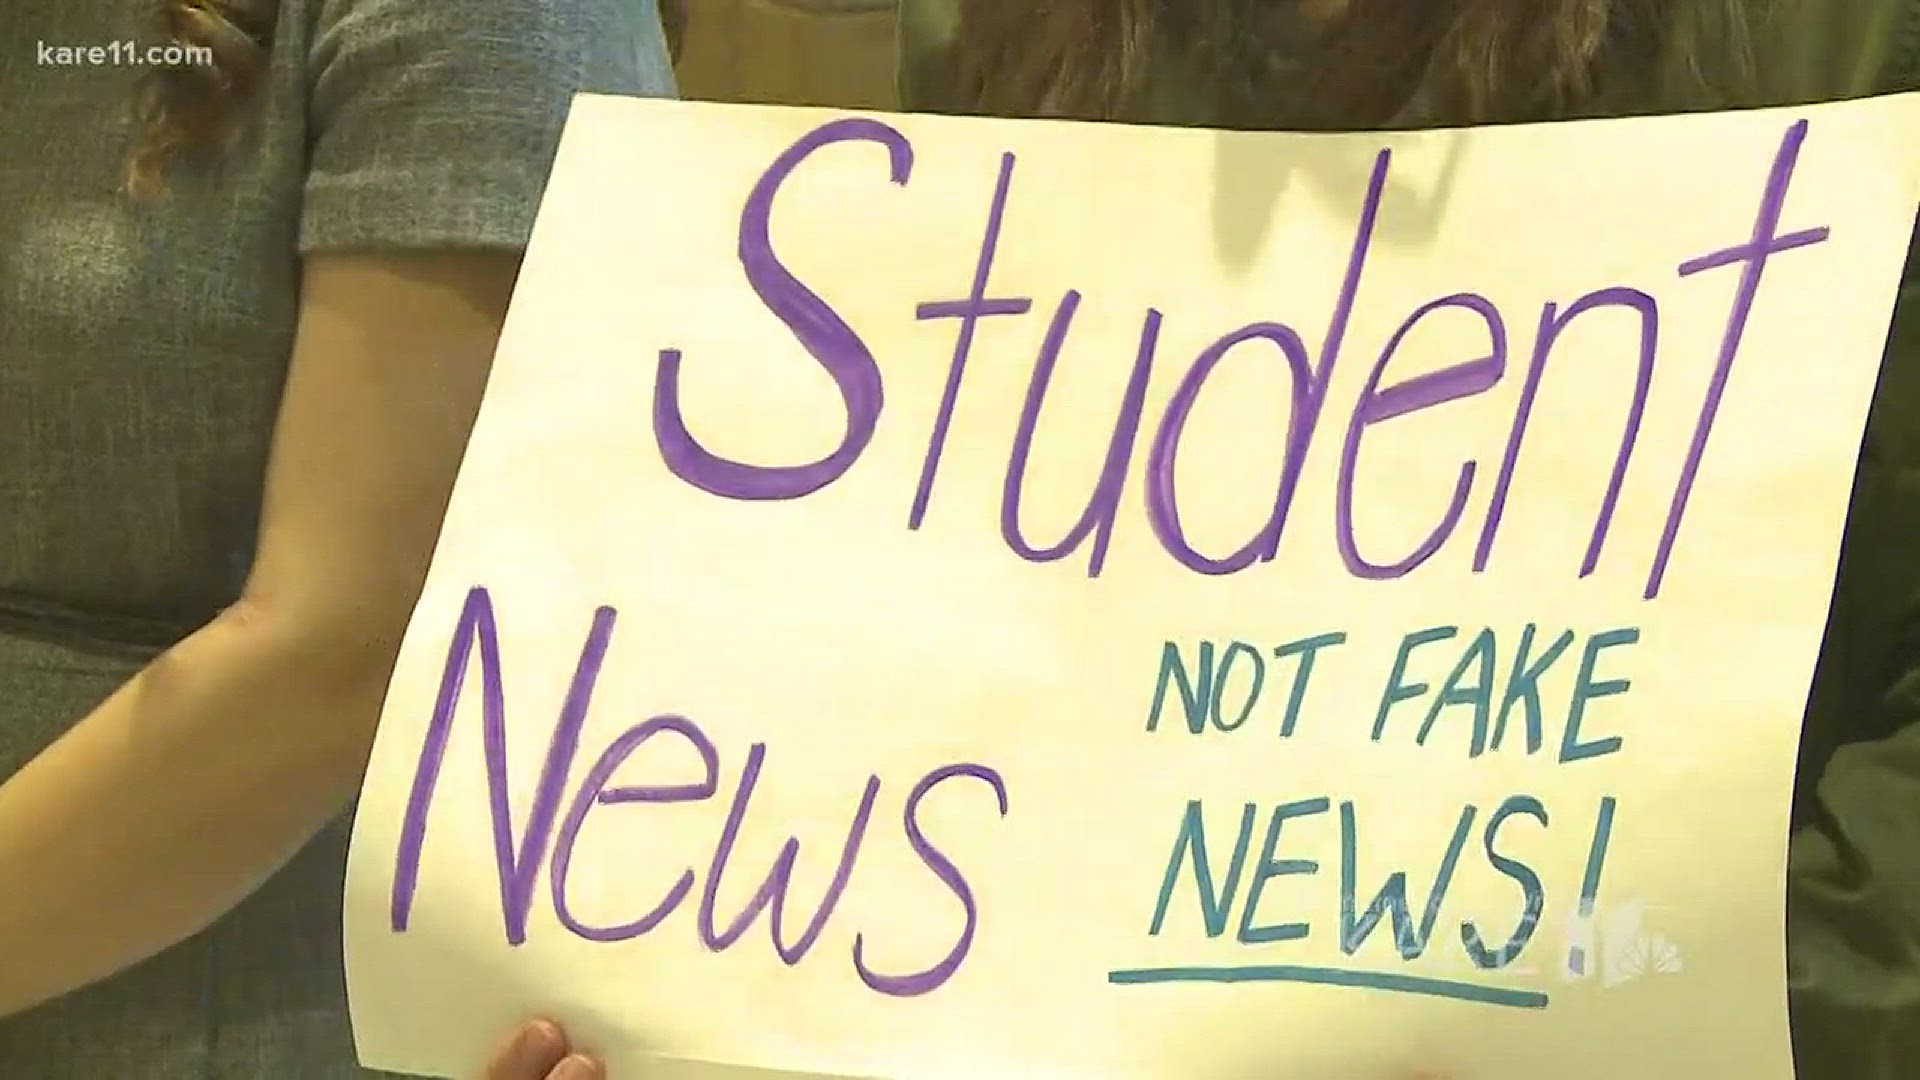 A group of high school journalists wants to make sure its rights are protected. http://kare11.tv/2FOAFqw